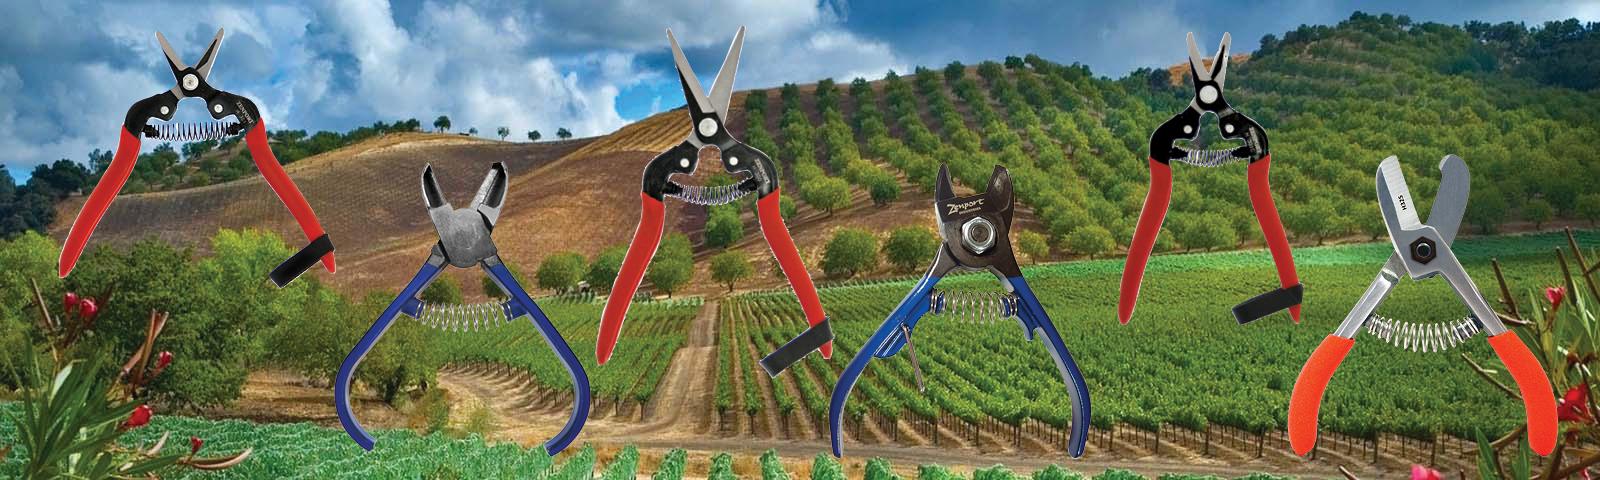 Harvest Shears and Stem Clippers